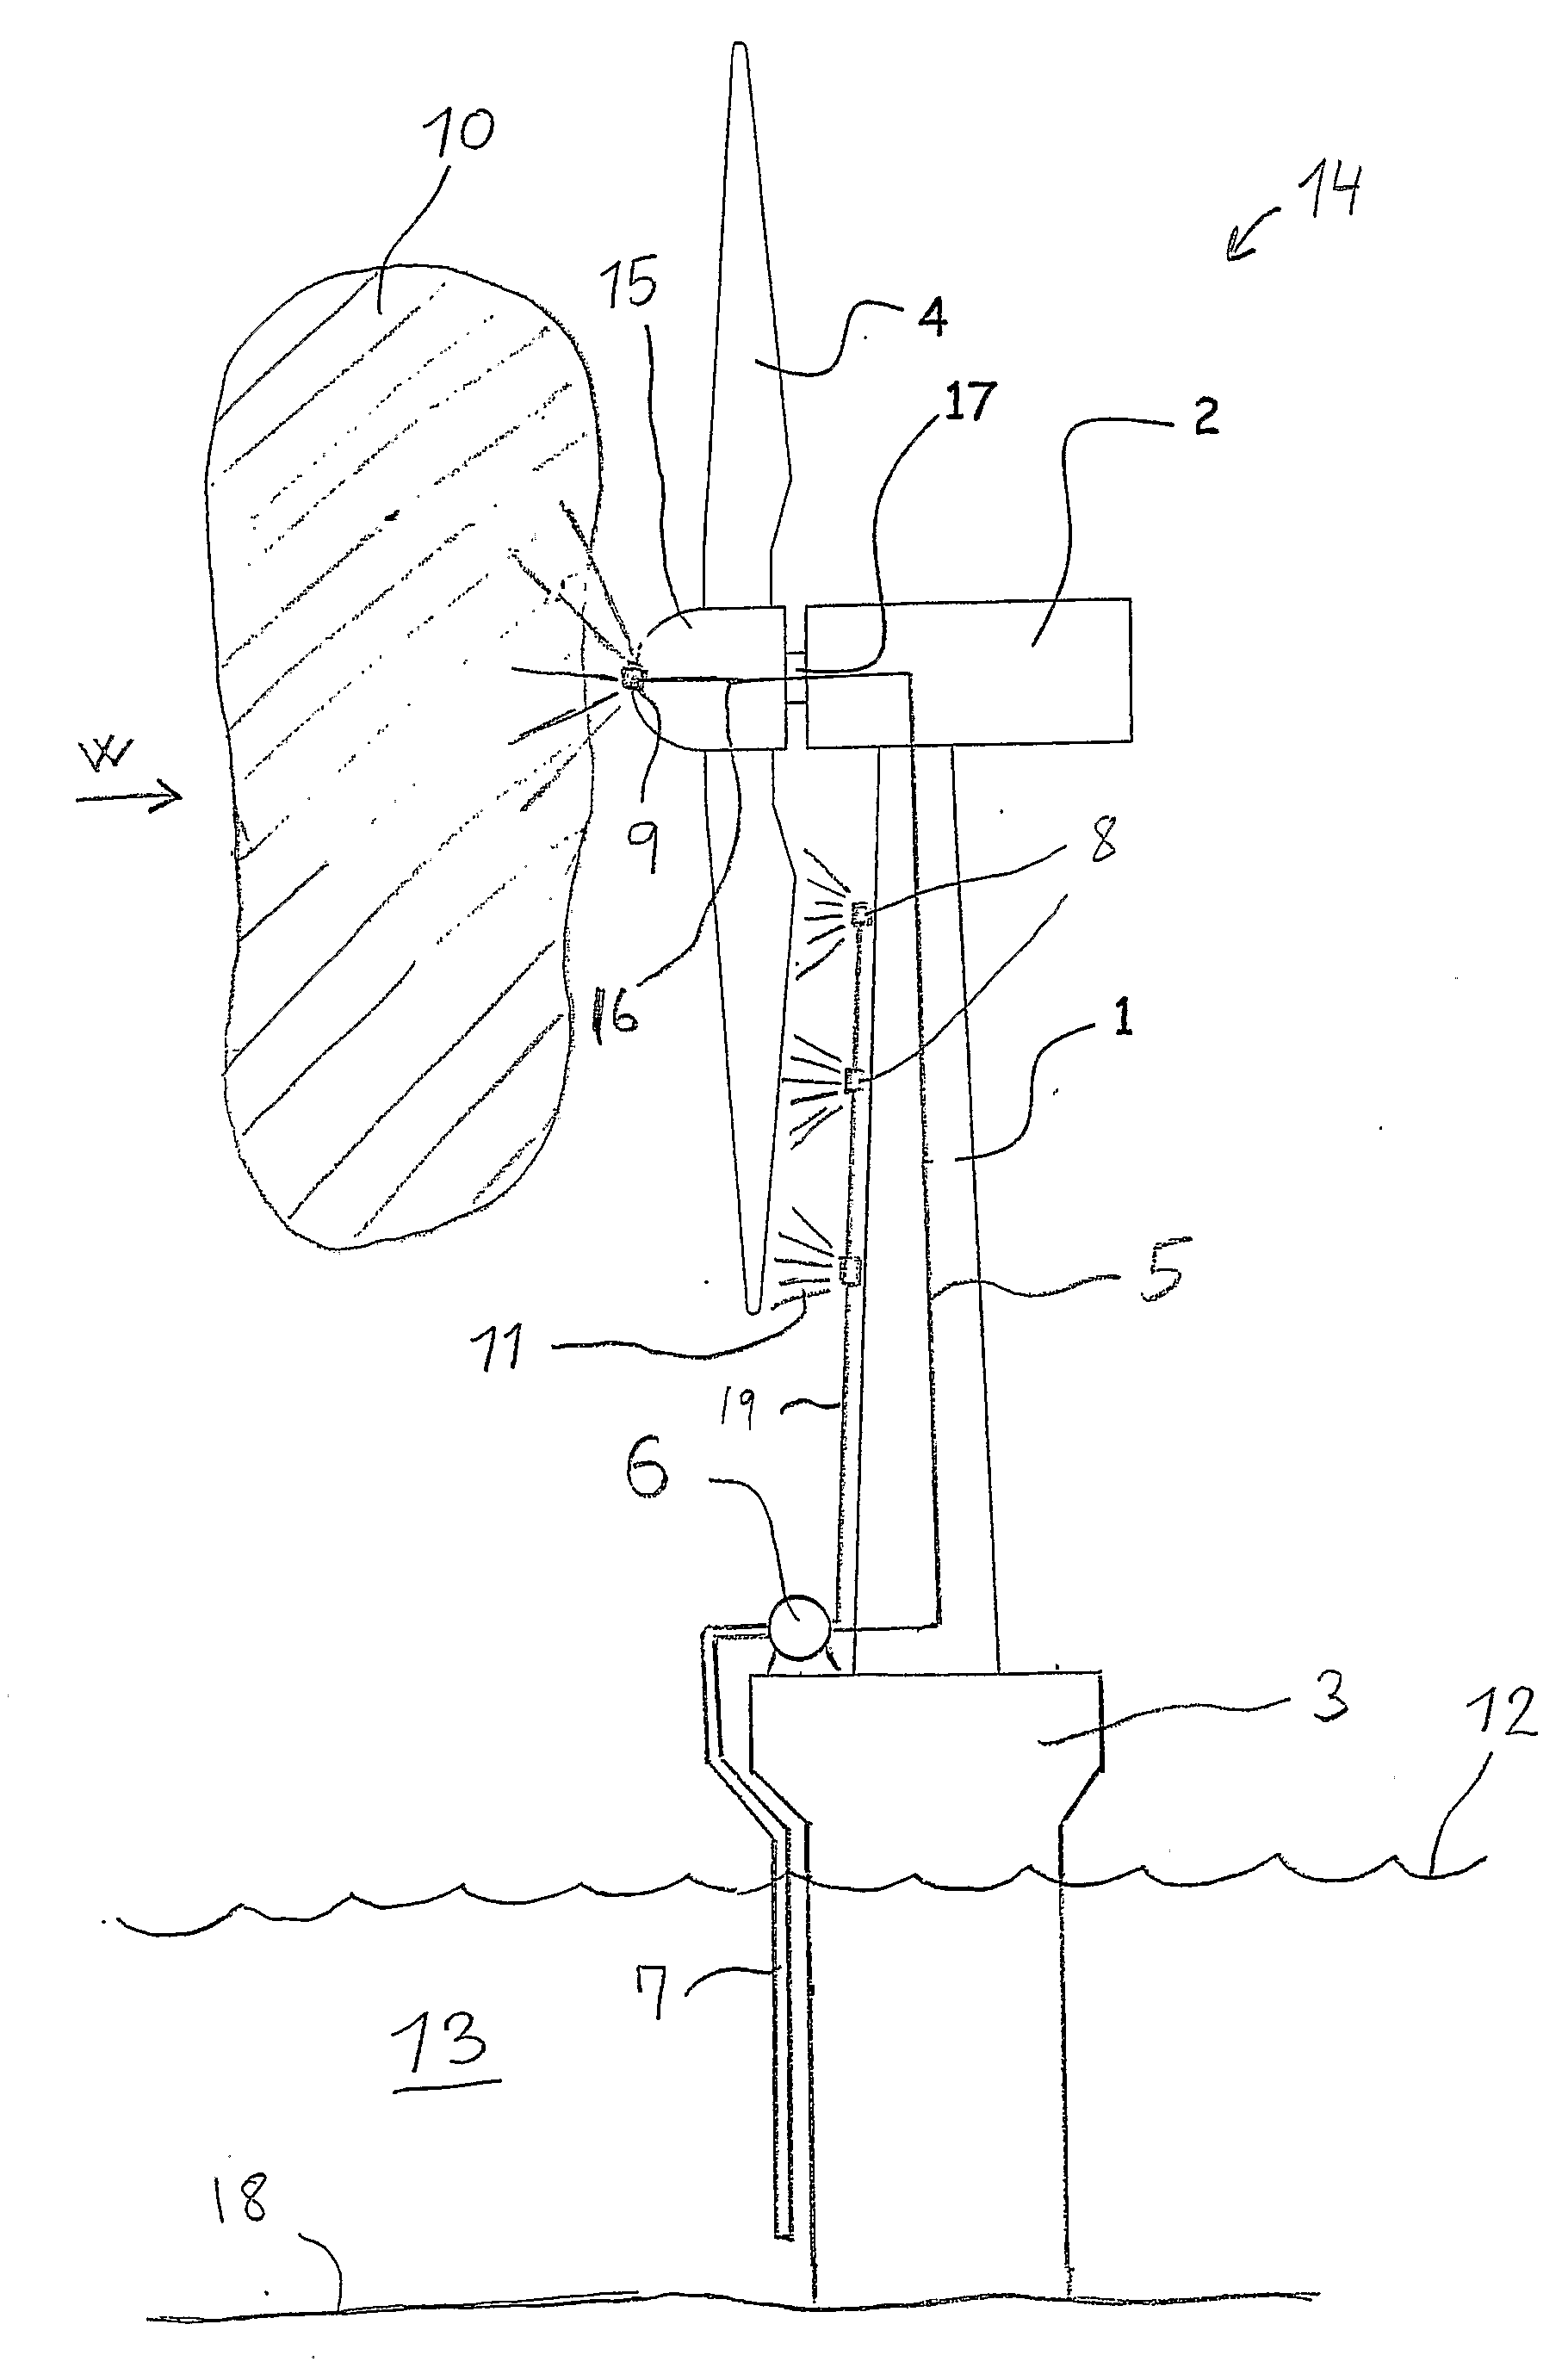 Offshore Wind Turbine with Device for Ice Prevention